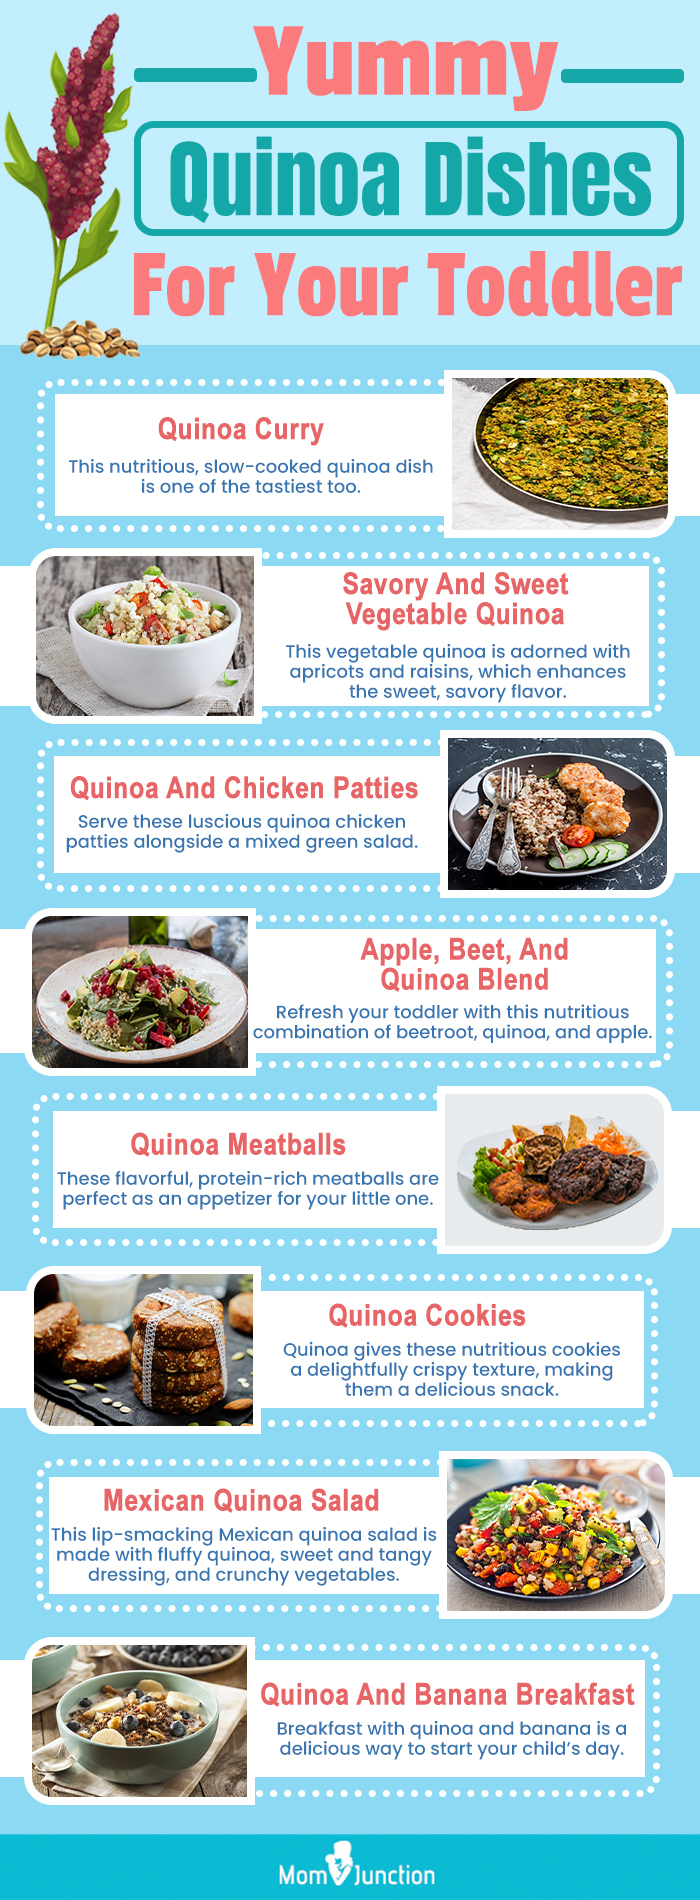 yummy quinoa dishes for your toddler (infographic)